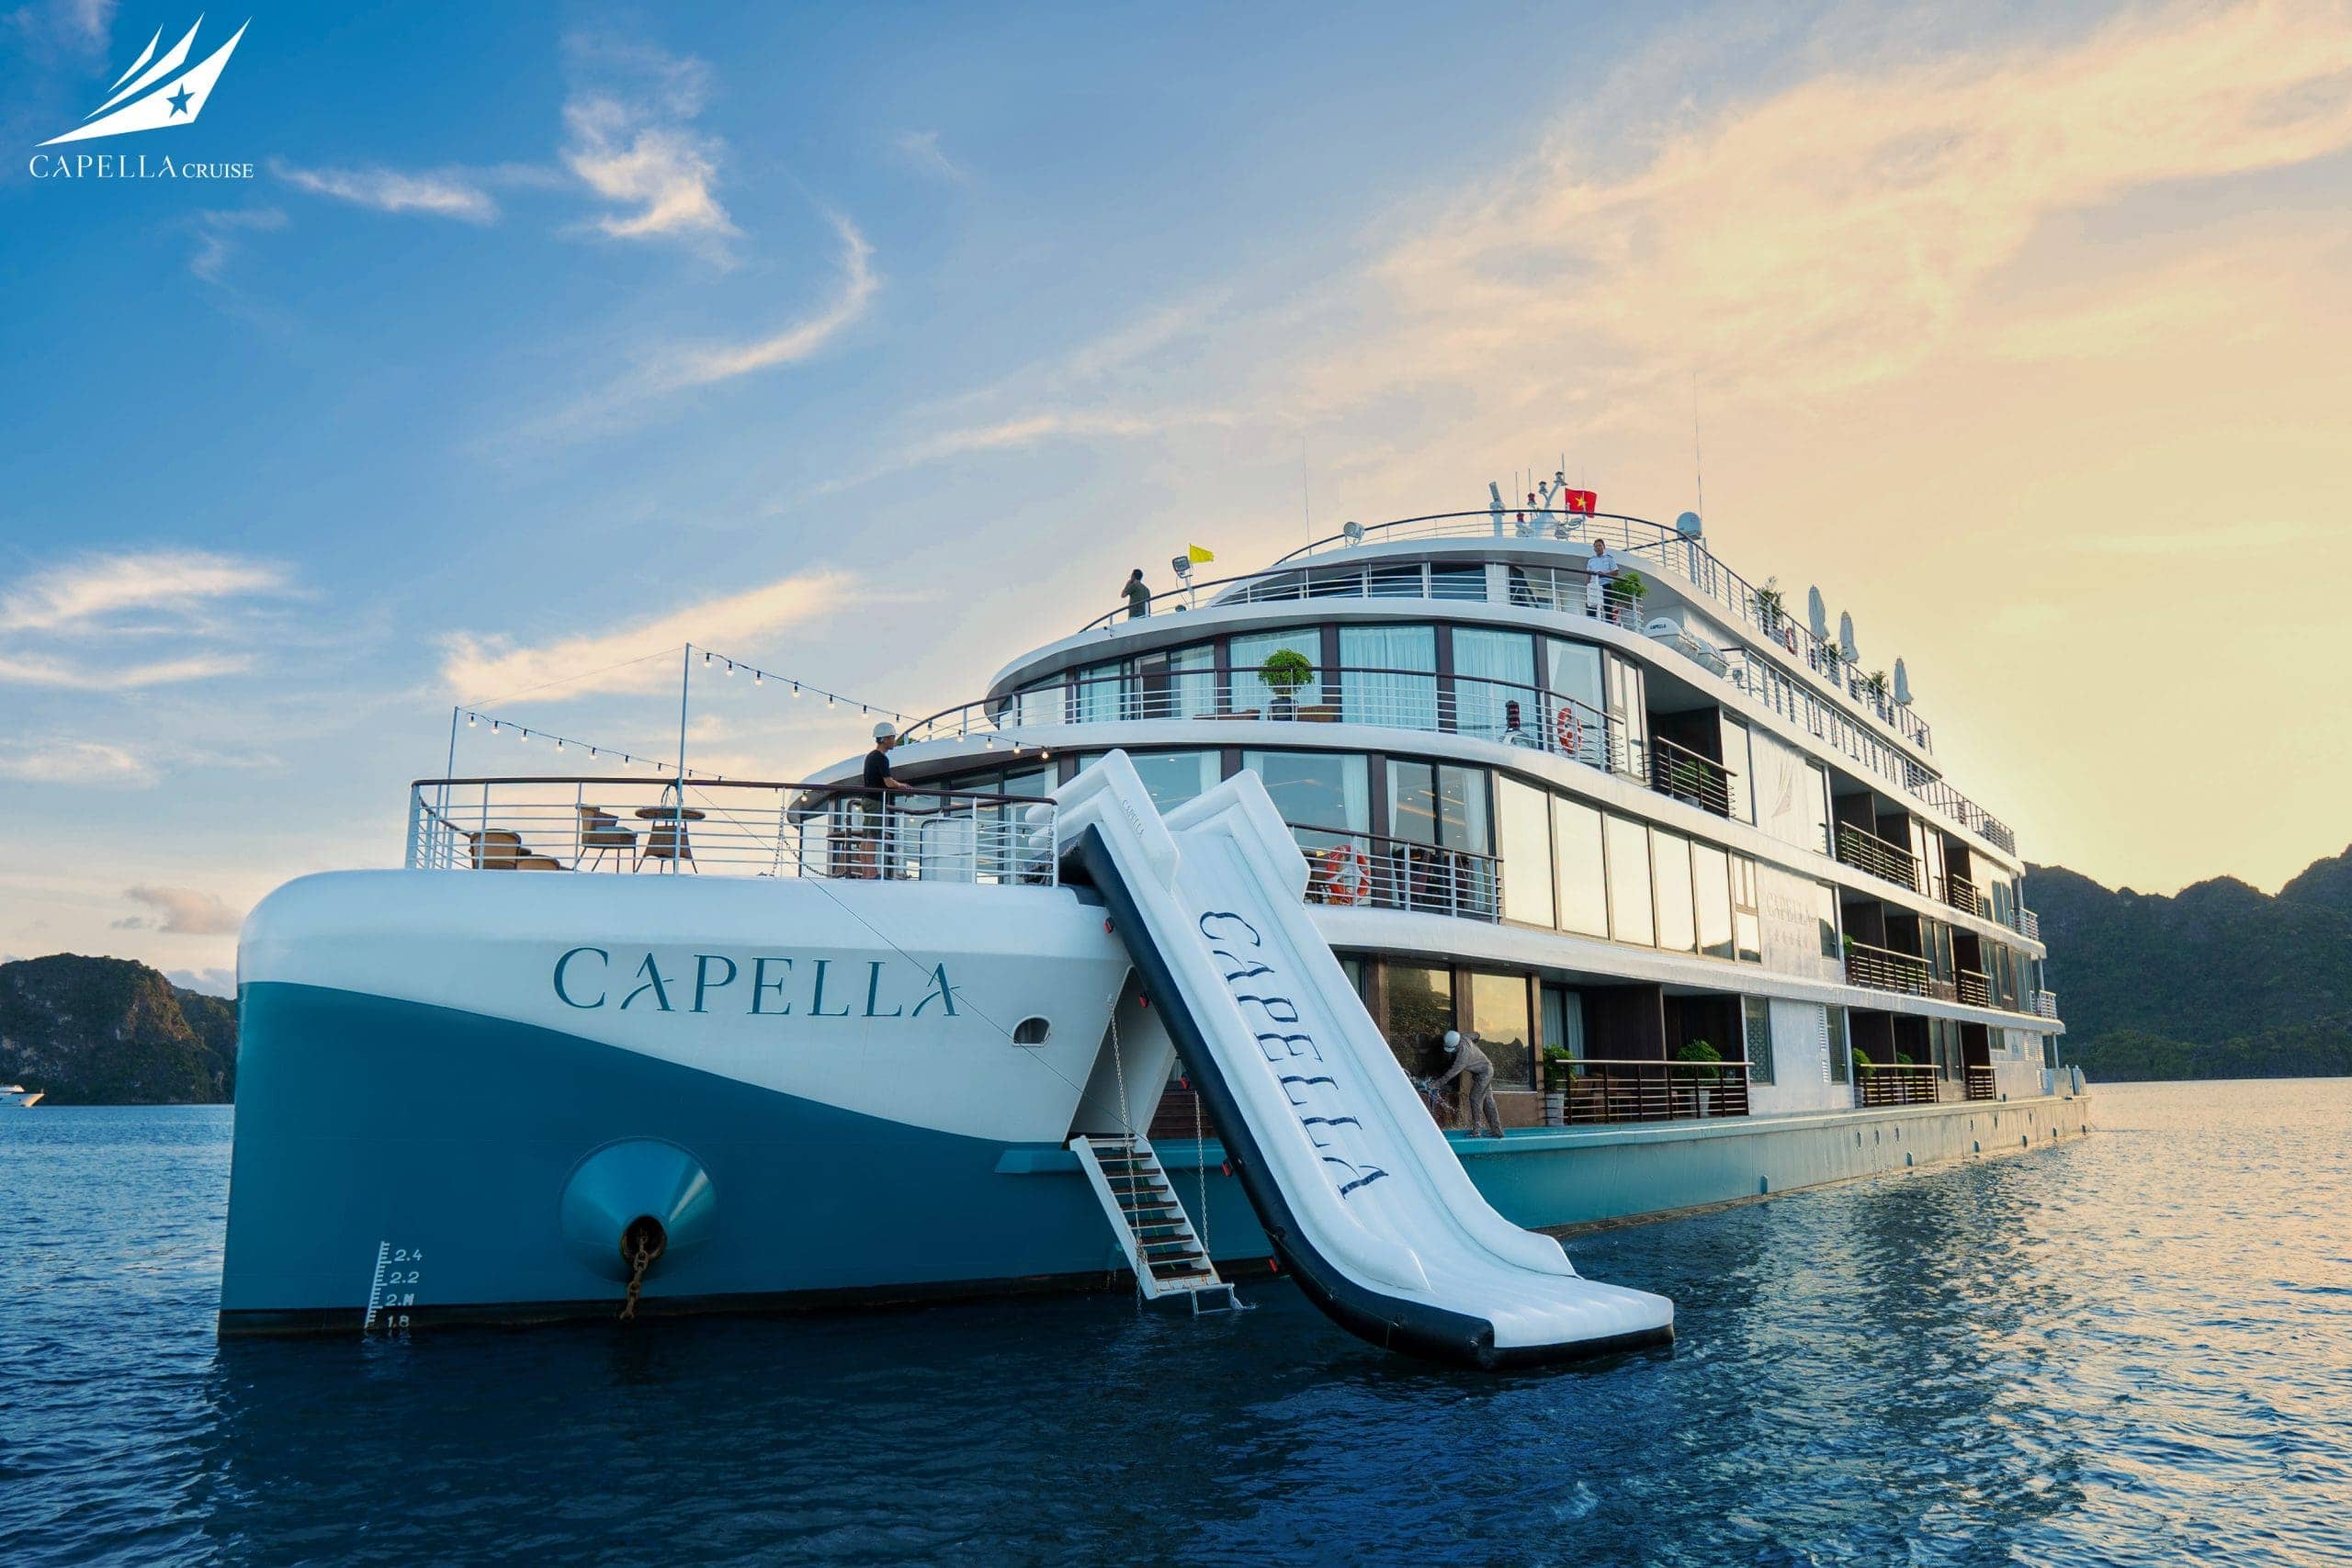 Capella cruise with waterslide